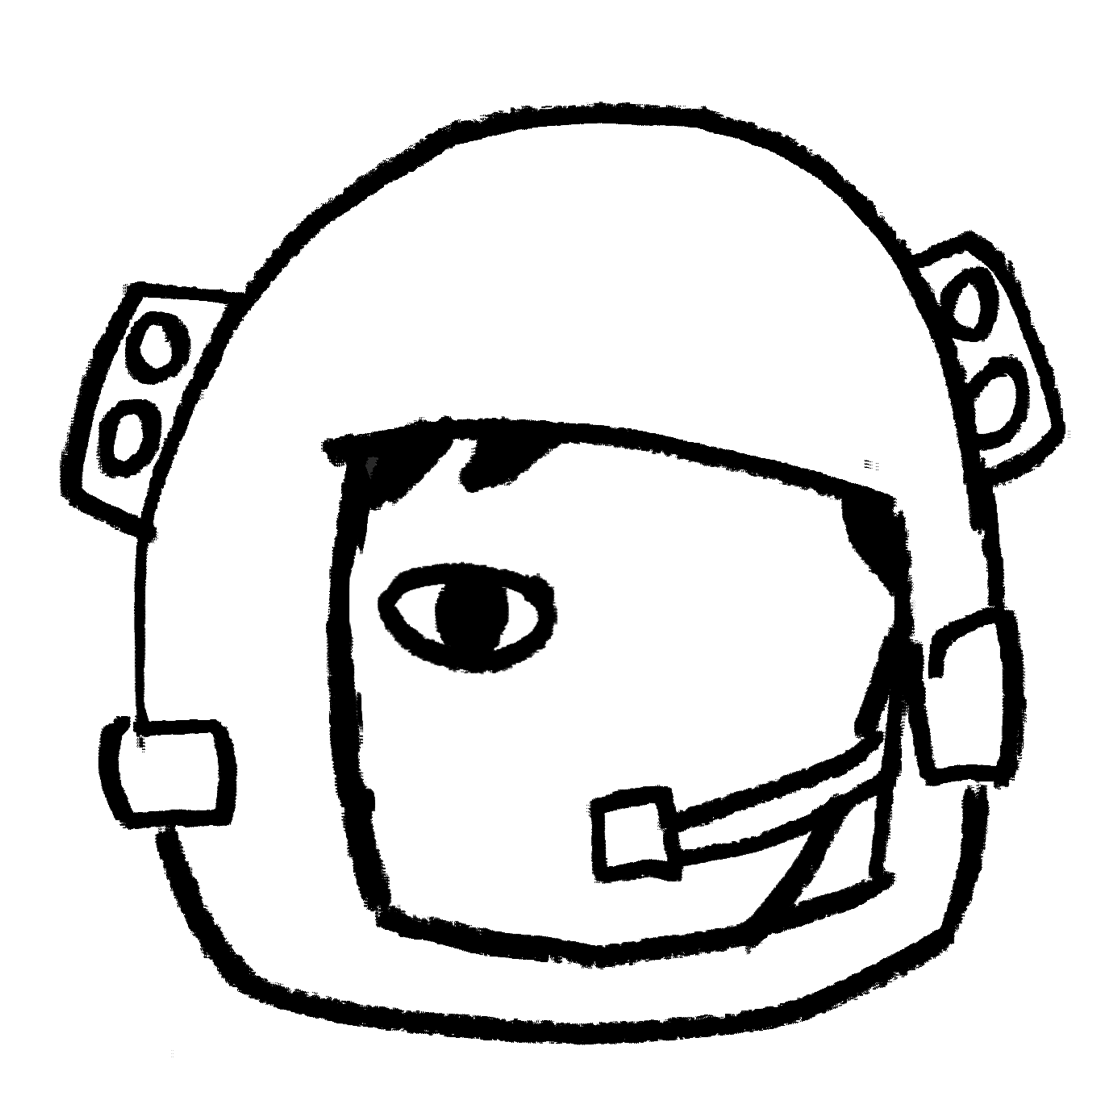 An illustration from the book Wonder by R J Palacio that shows the character Auggie with an astronaut helmet on